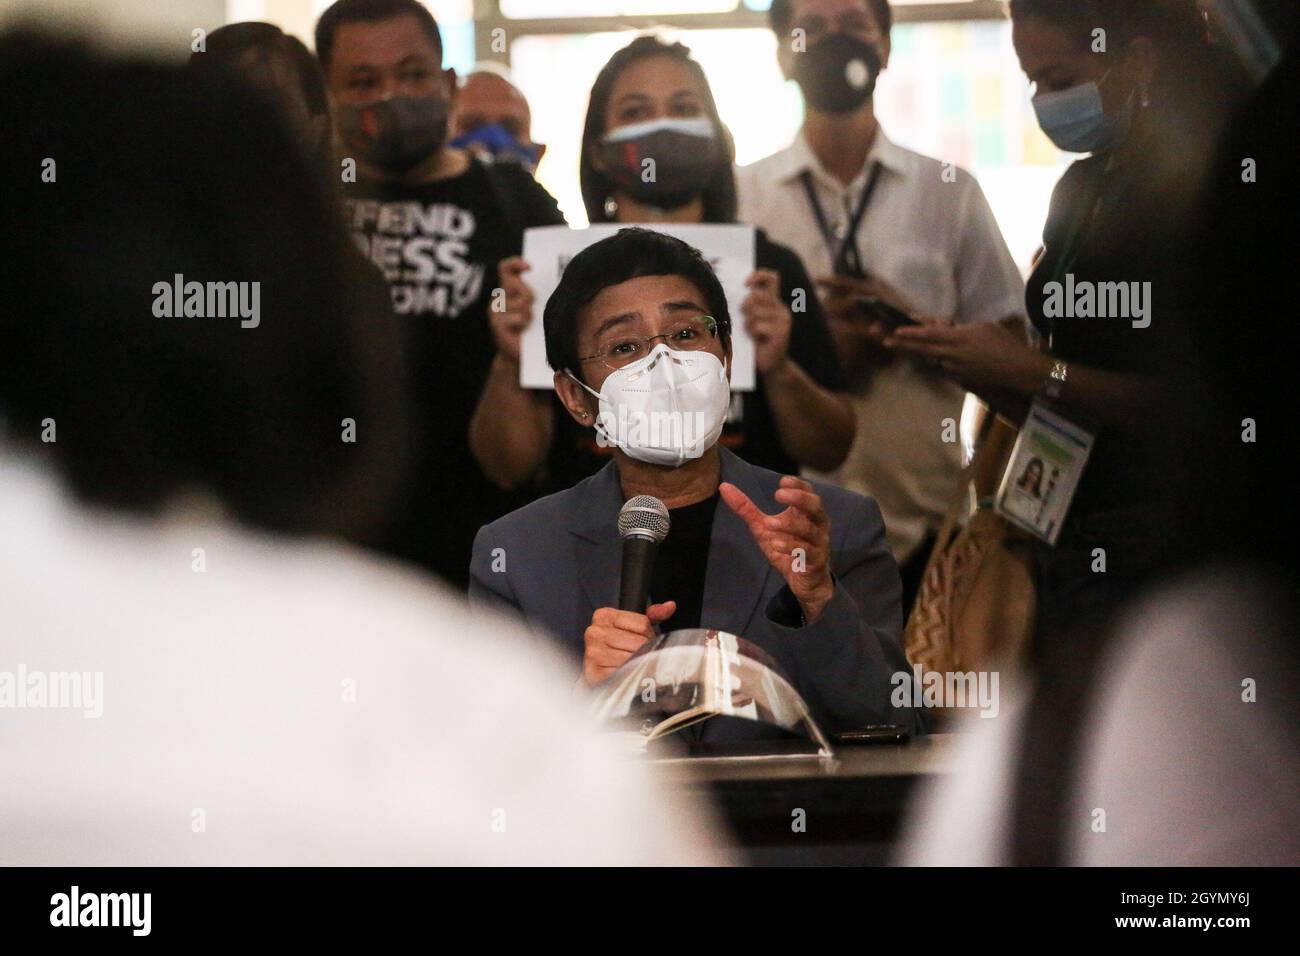 Rappler CEO and Executive Editor, Maria Ressa (center) wearing a protective mask gestures as she attends a media conference after a court hearing at the Manila Regional Trial Court, Philippines on Monday. June 15, 2020. The Manila court found Maria Ressa, her online news outfit Rappler Inc. and former reporter Reynaldo Santos Jr. guilty of cyber libel. Philippines. Stock Photo